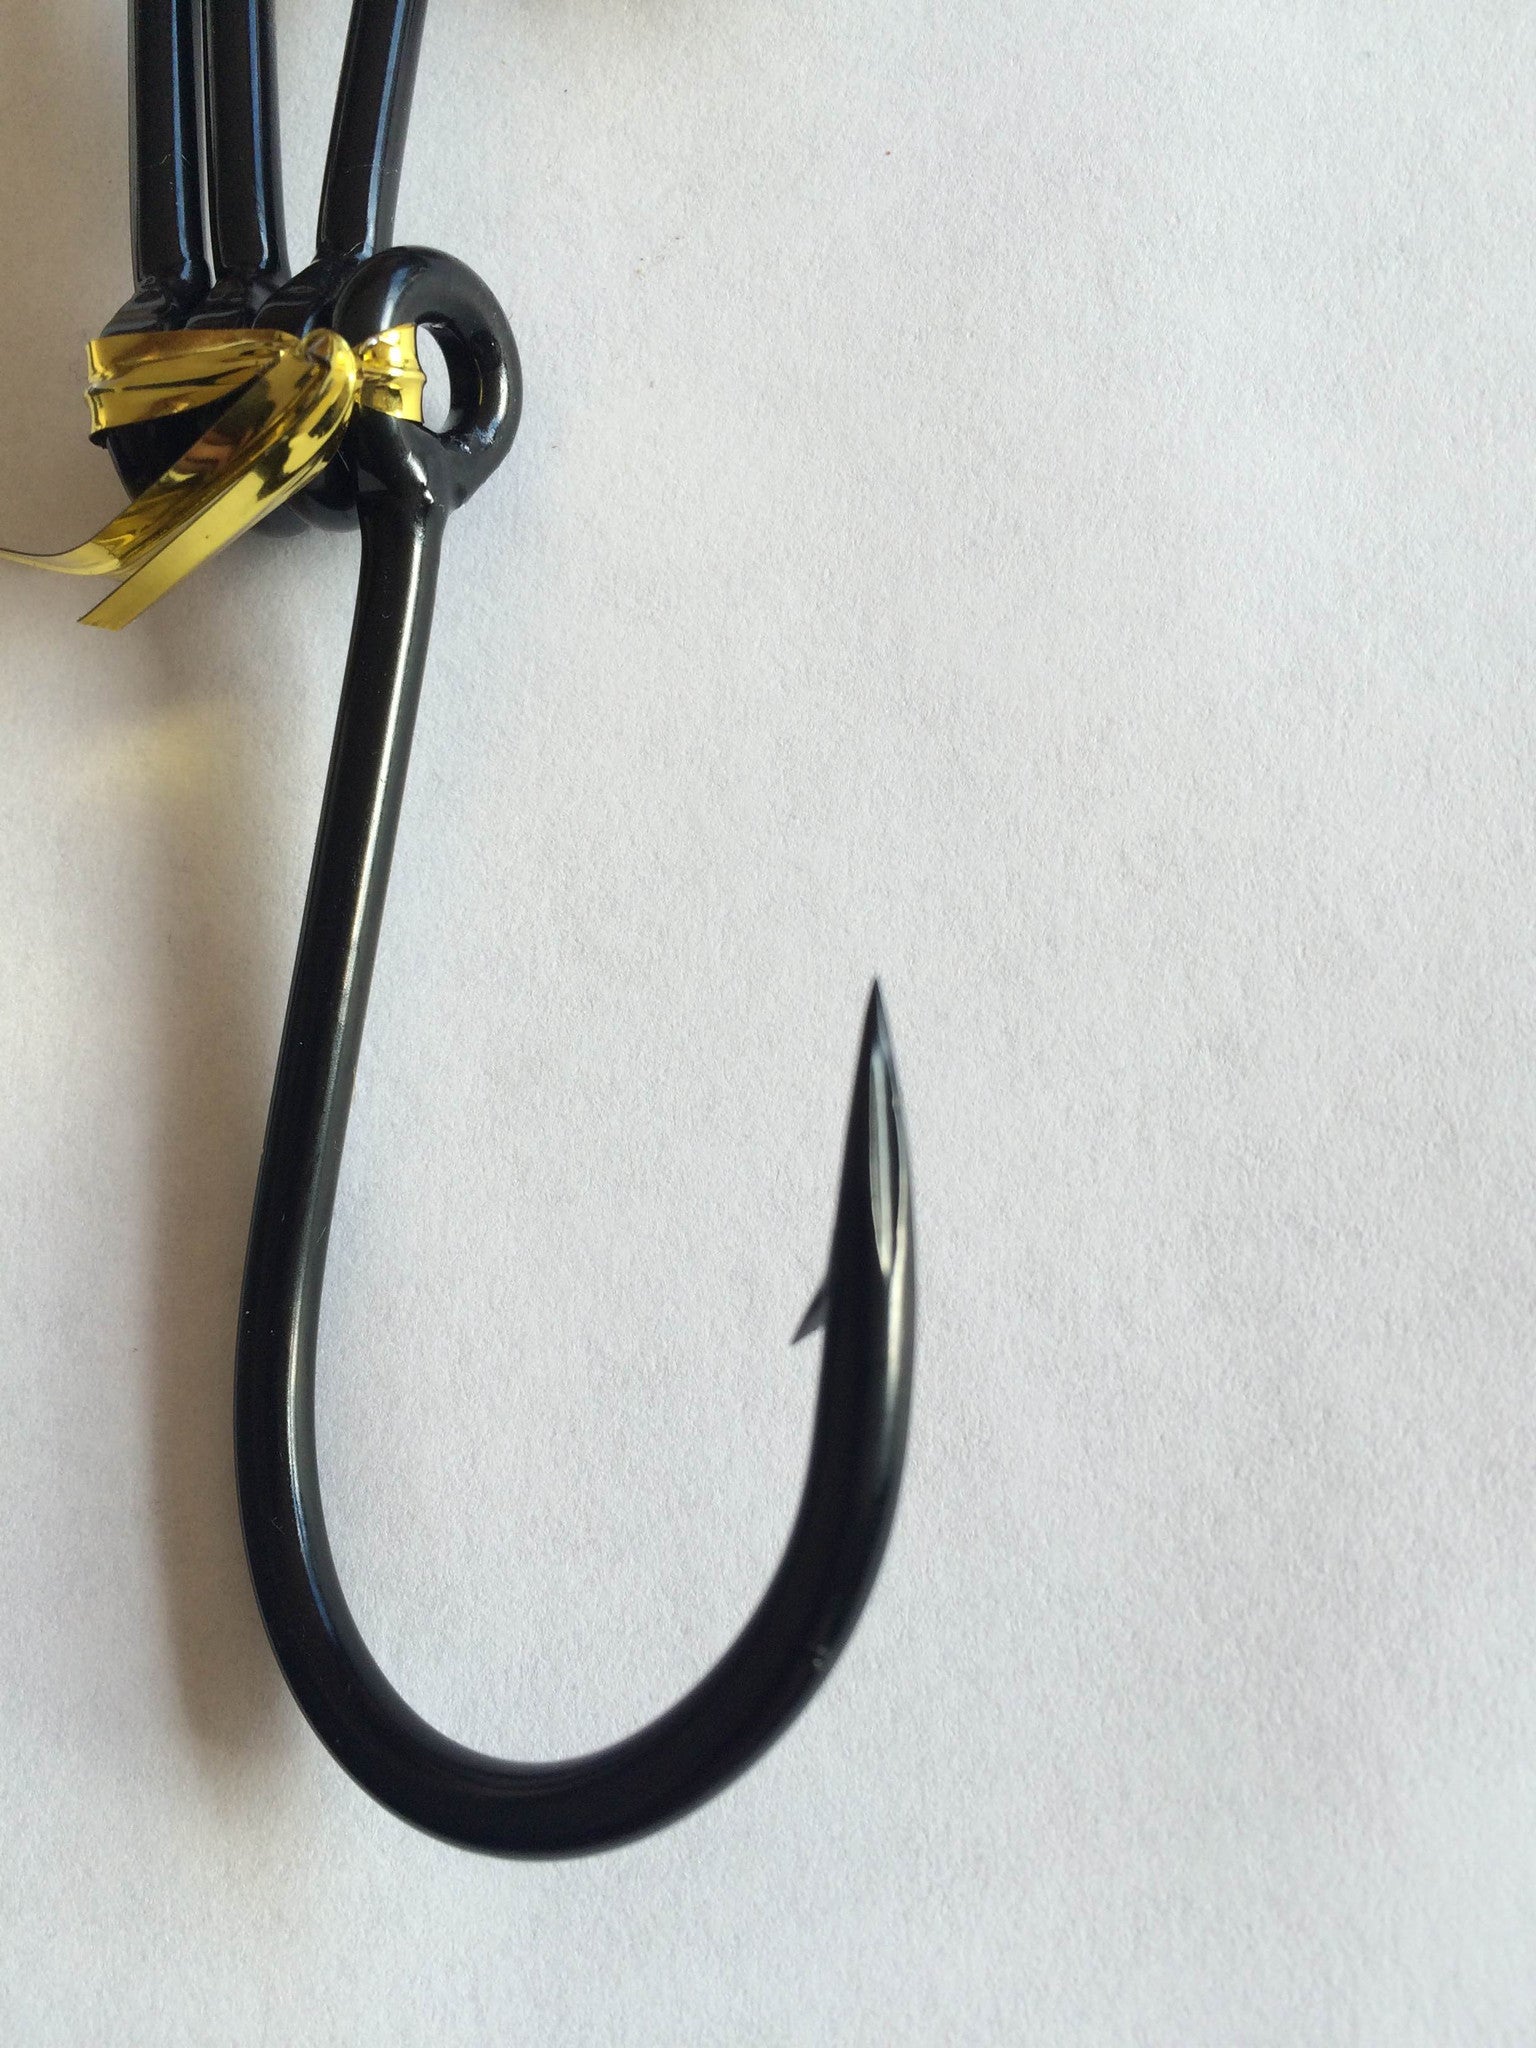 Mustad Big Game Southern & Tuna Stainless Steel Hook 7691S-SS